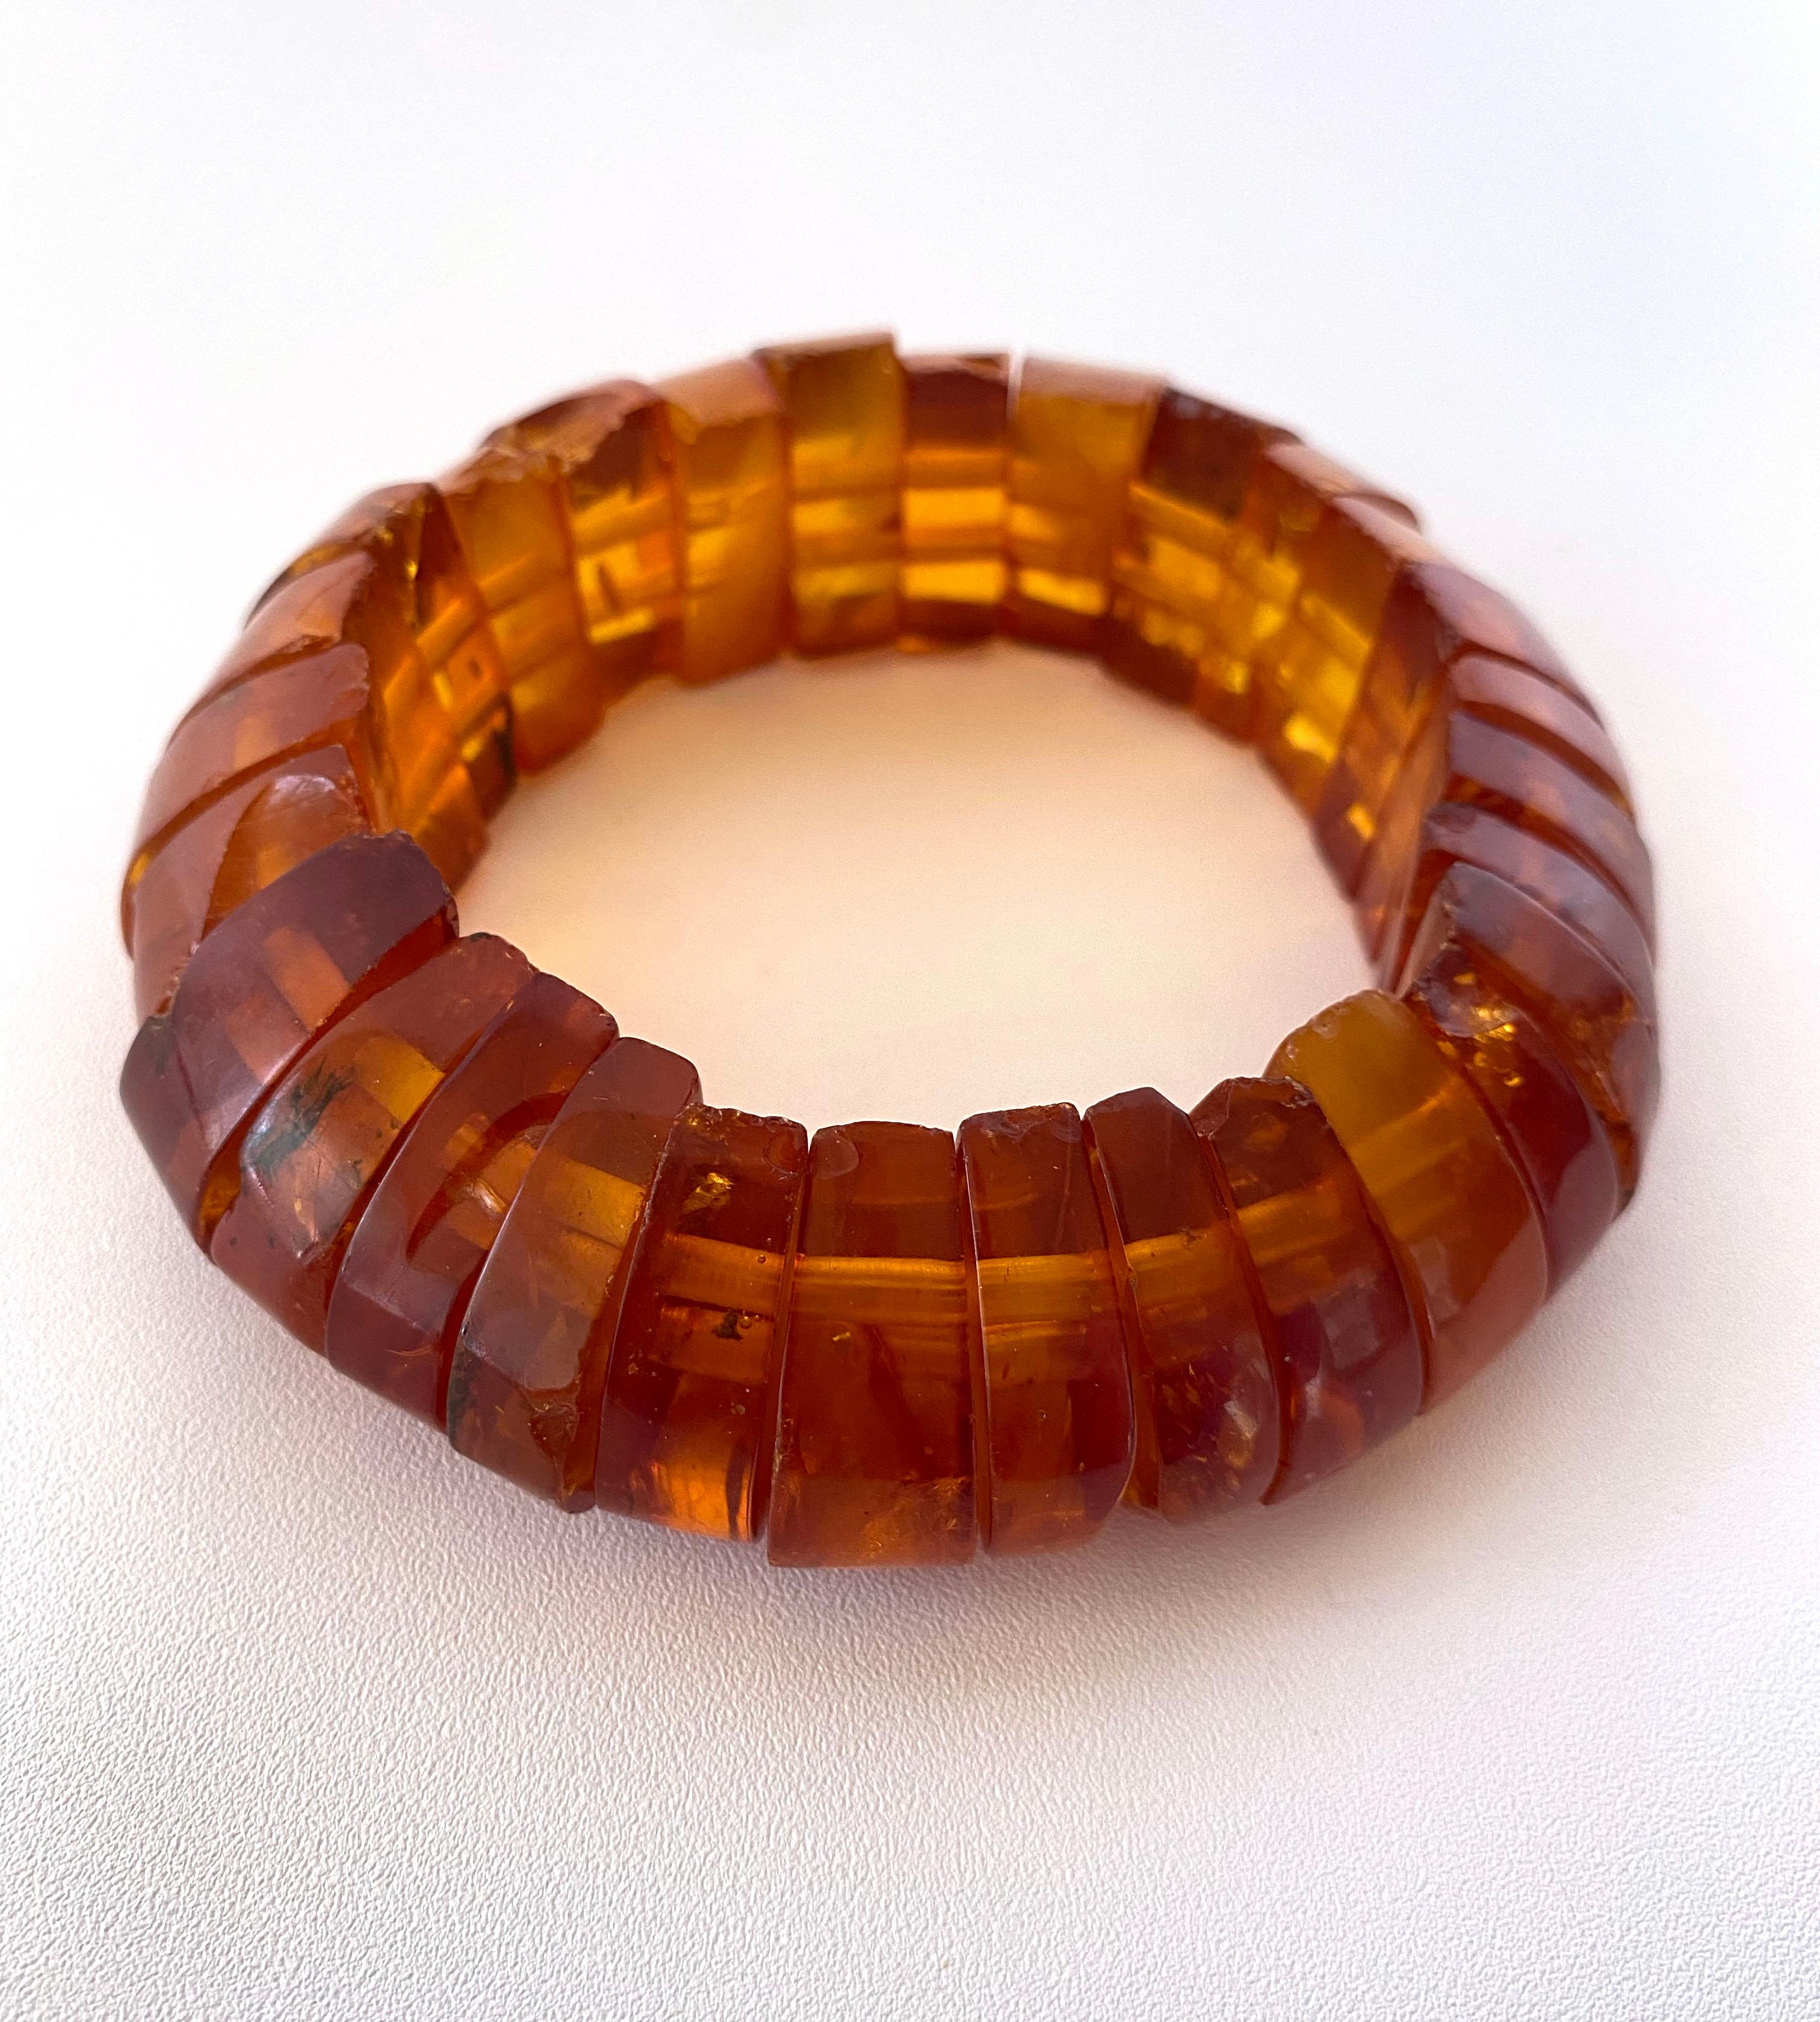 Beautiful and simple bracelet made with all Baltic Amber. Composed of individually cut pieces, this bracelet features perfectly matching and uniform Amber beads for a harmonious 1970s infinity look. Baltic Amber radiates gorgeous moments of Orange,